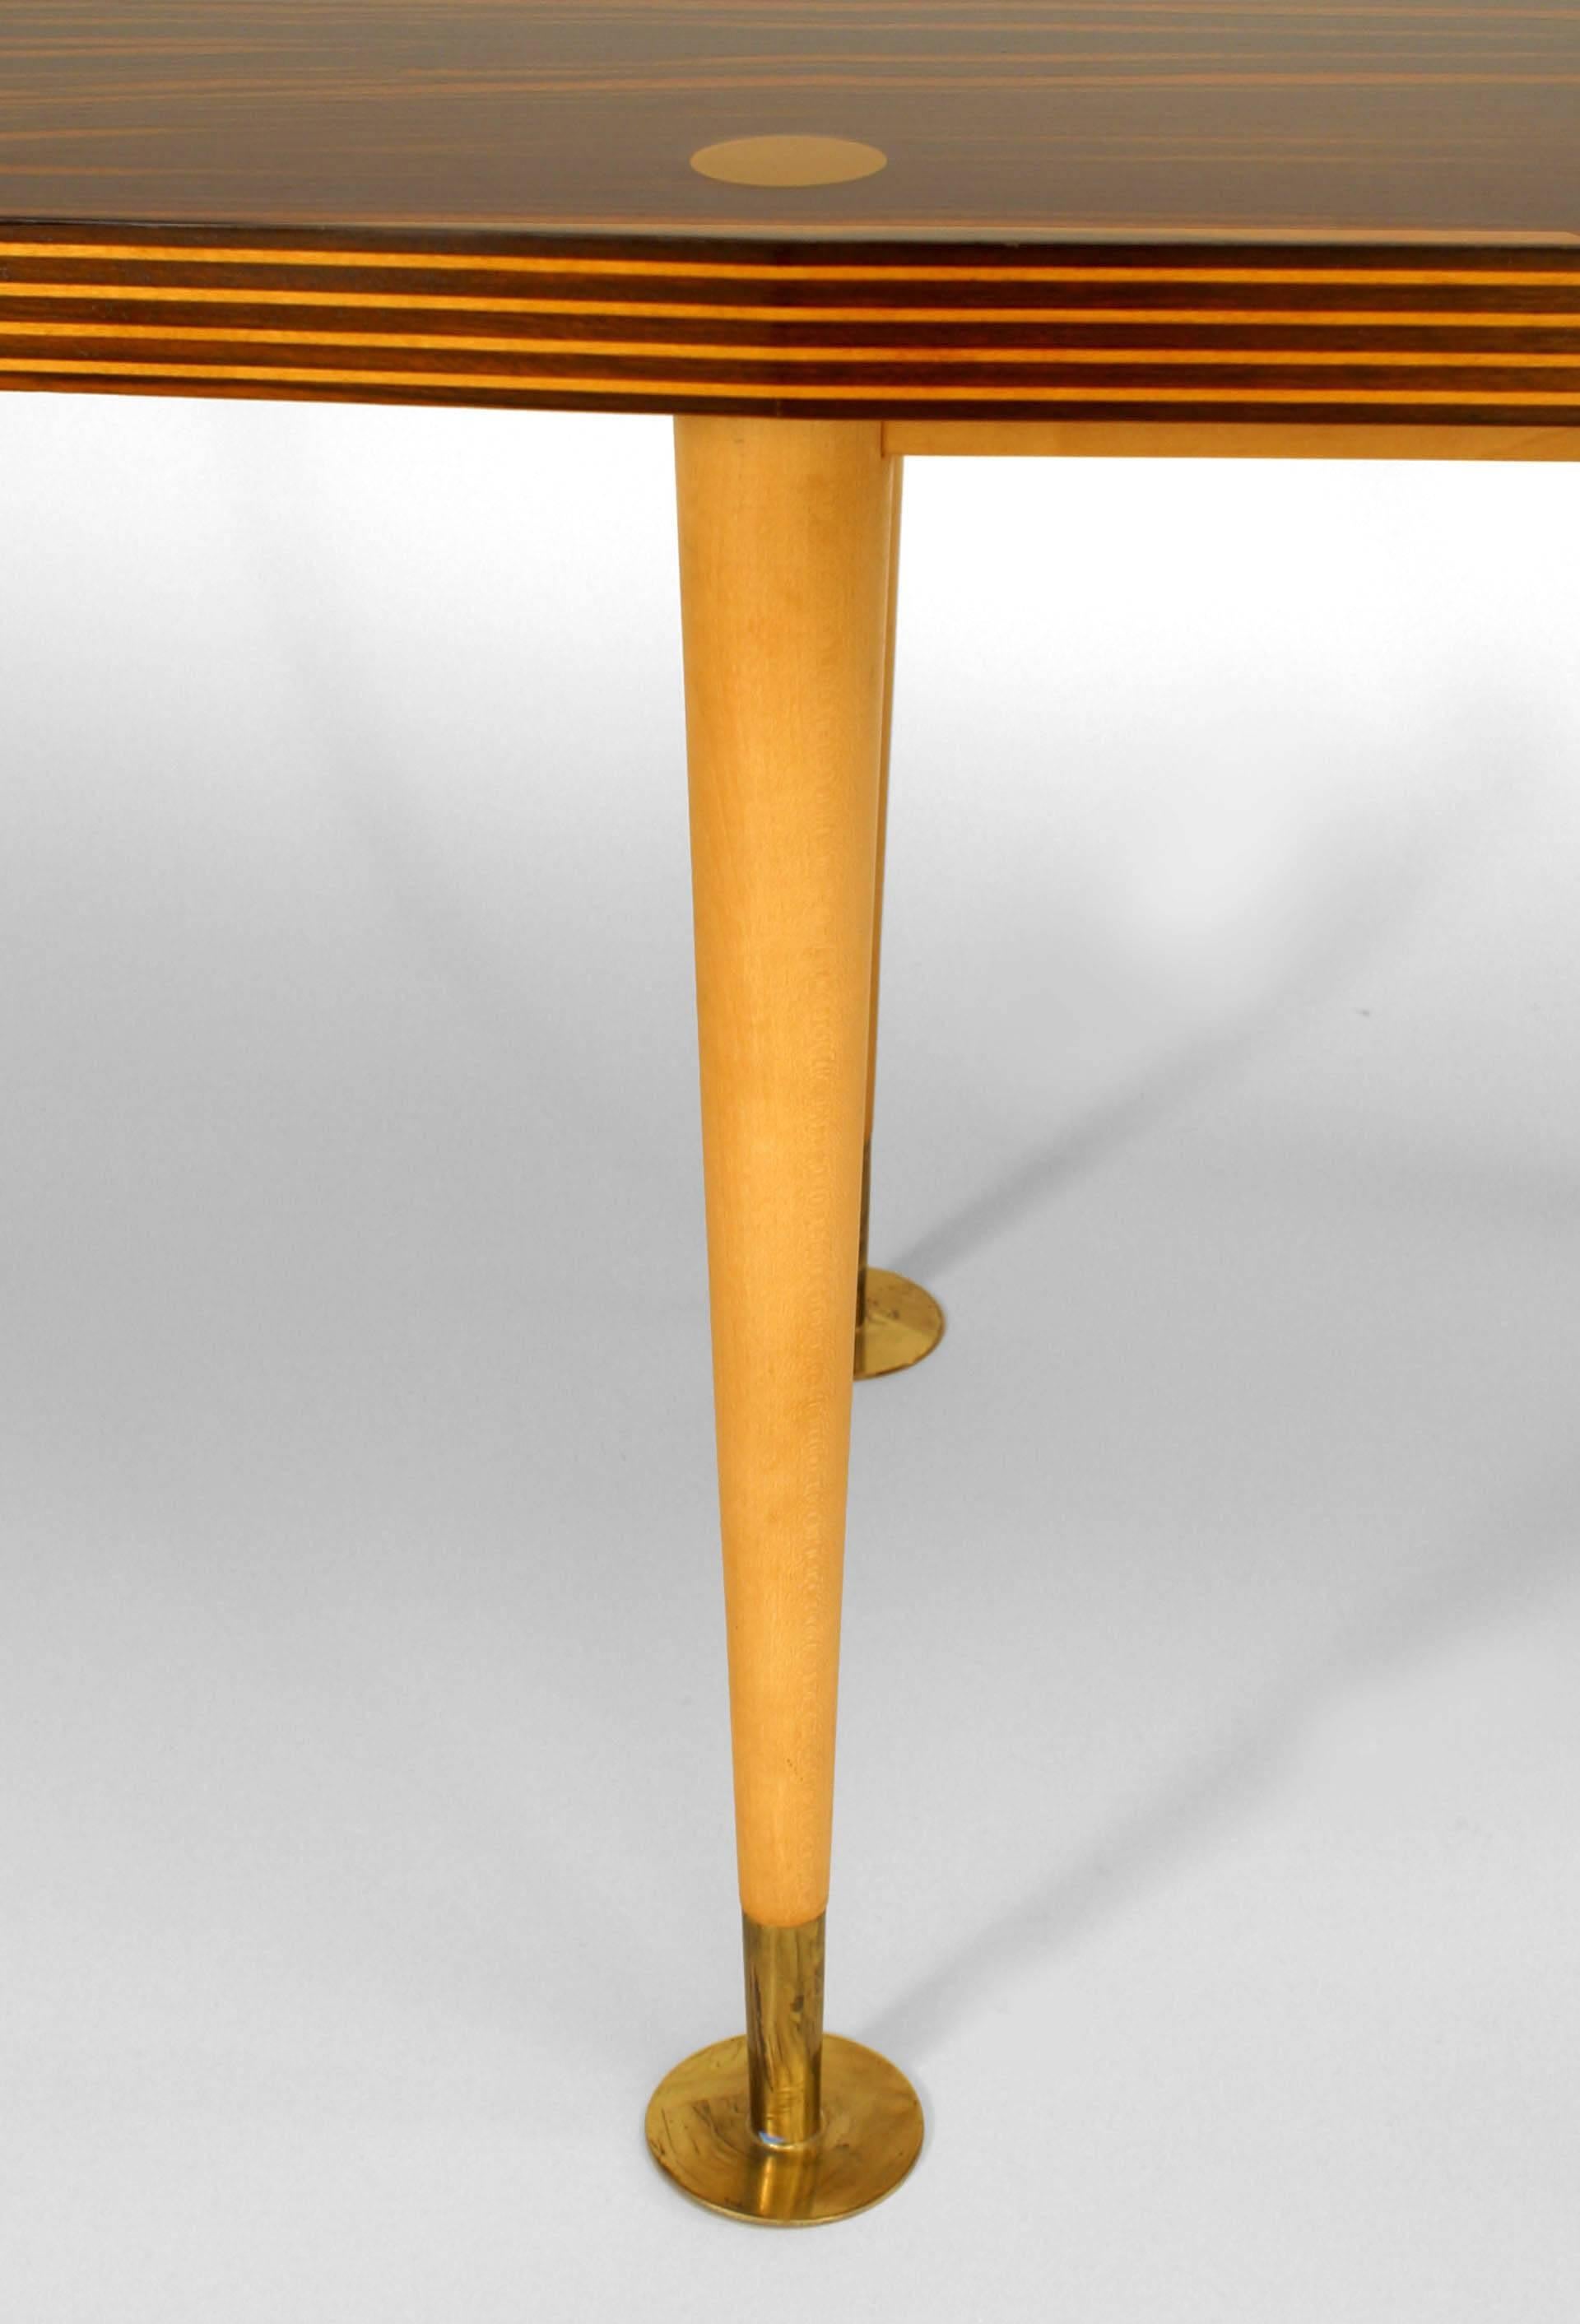 Mid-20th Century Italian Modern Palisander, Maple, and Sycamore Coffee Table For Sale